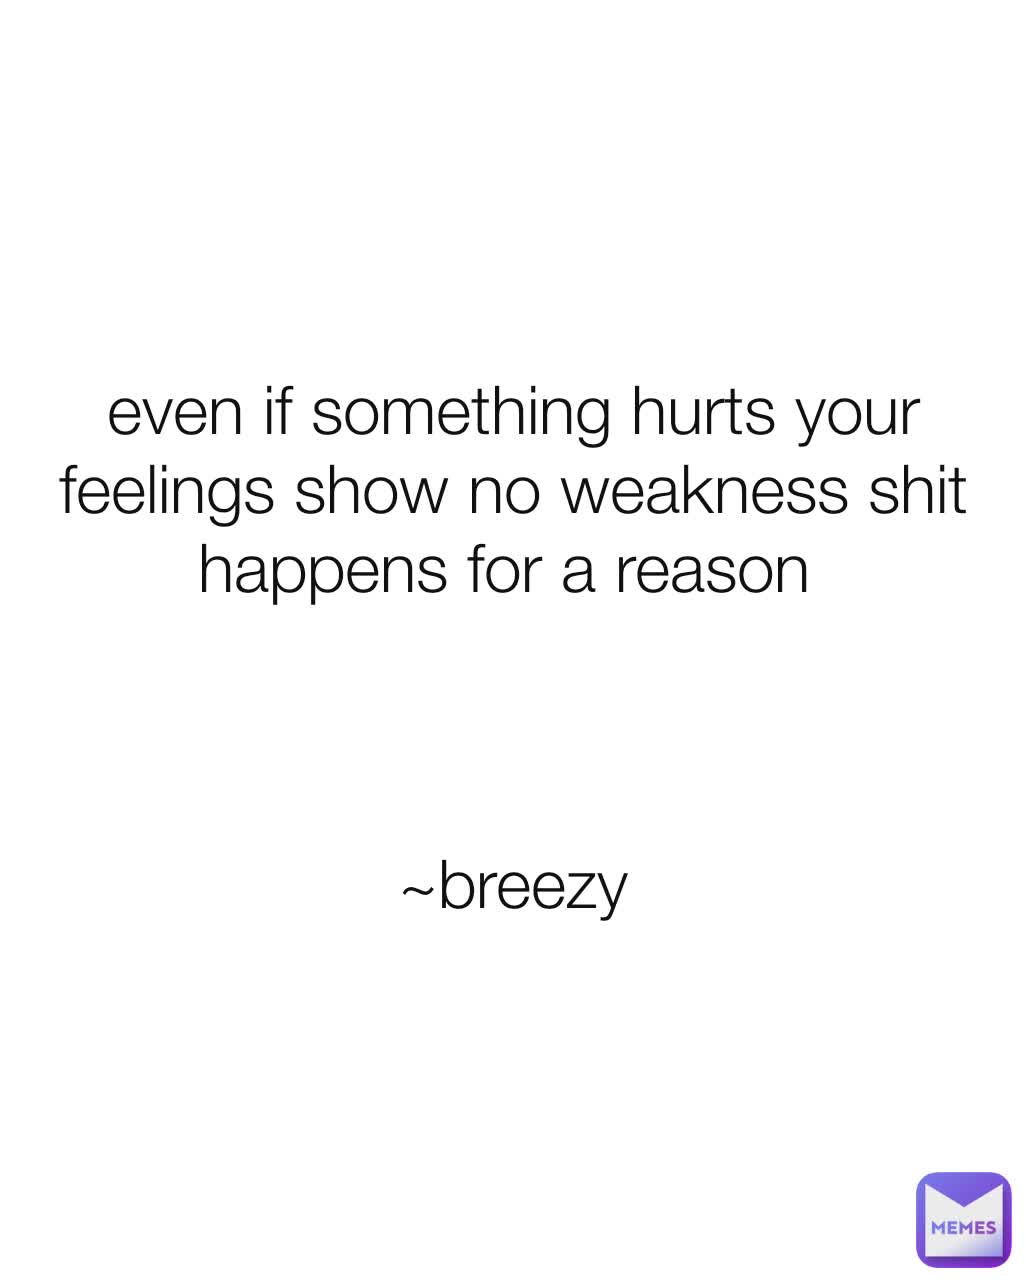 even if something hurts your feelings show no weakness shit happens for a reason 



~breezy